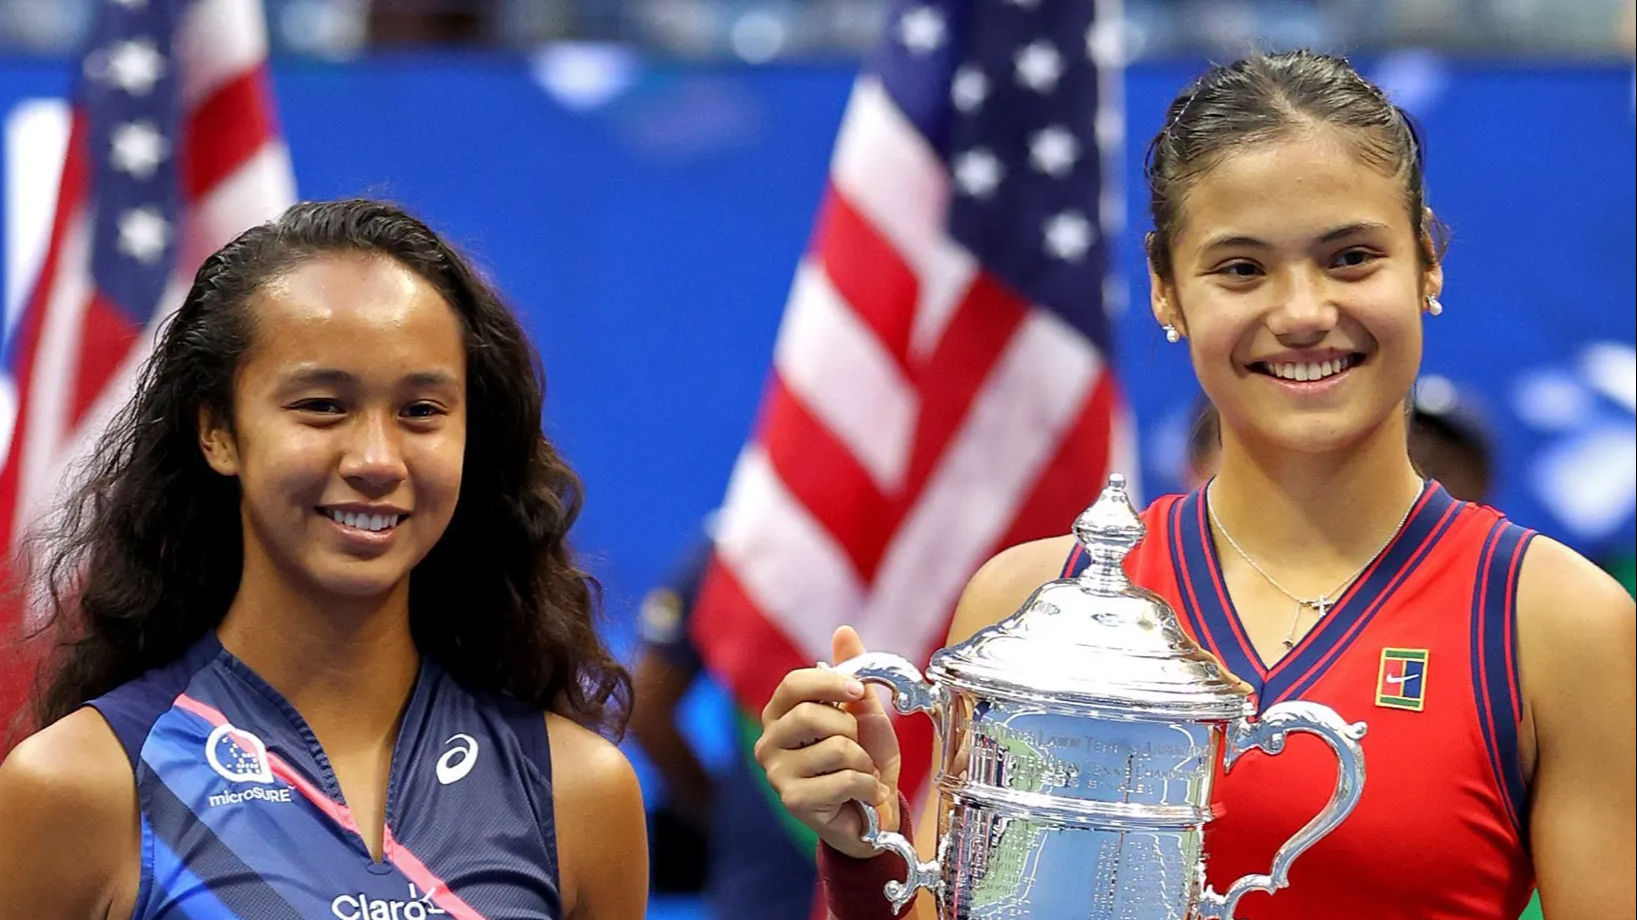 High-level tennis, contagious smile: Internet reacts to Emma Raducanu’s US Open victory